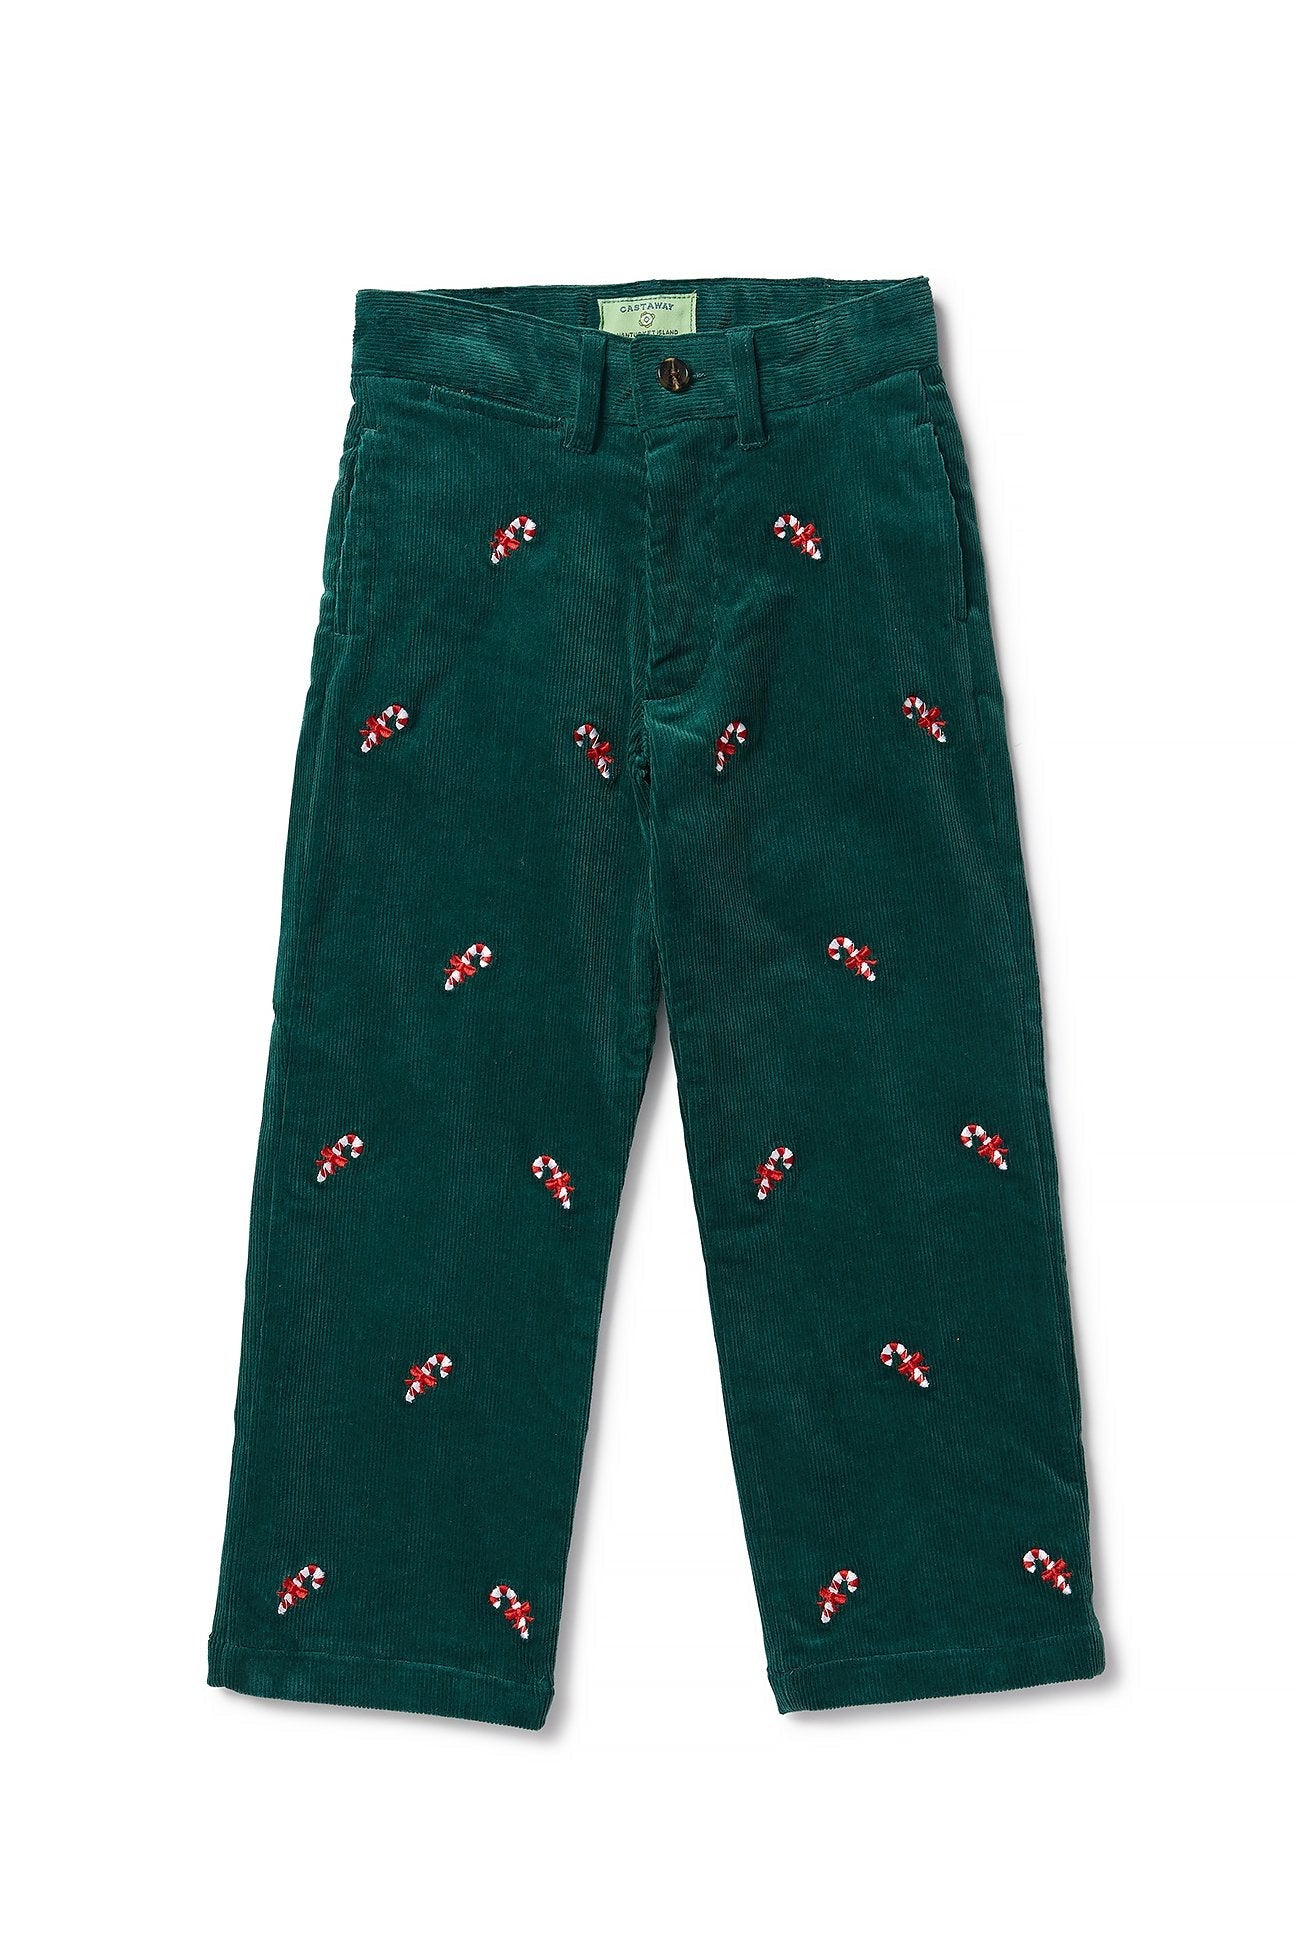 Kids Green Embroidered Leggings by Main Story on Sale